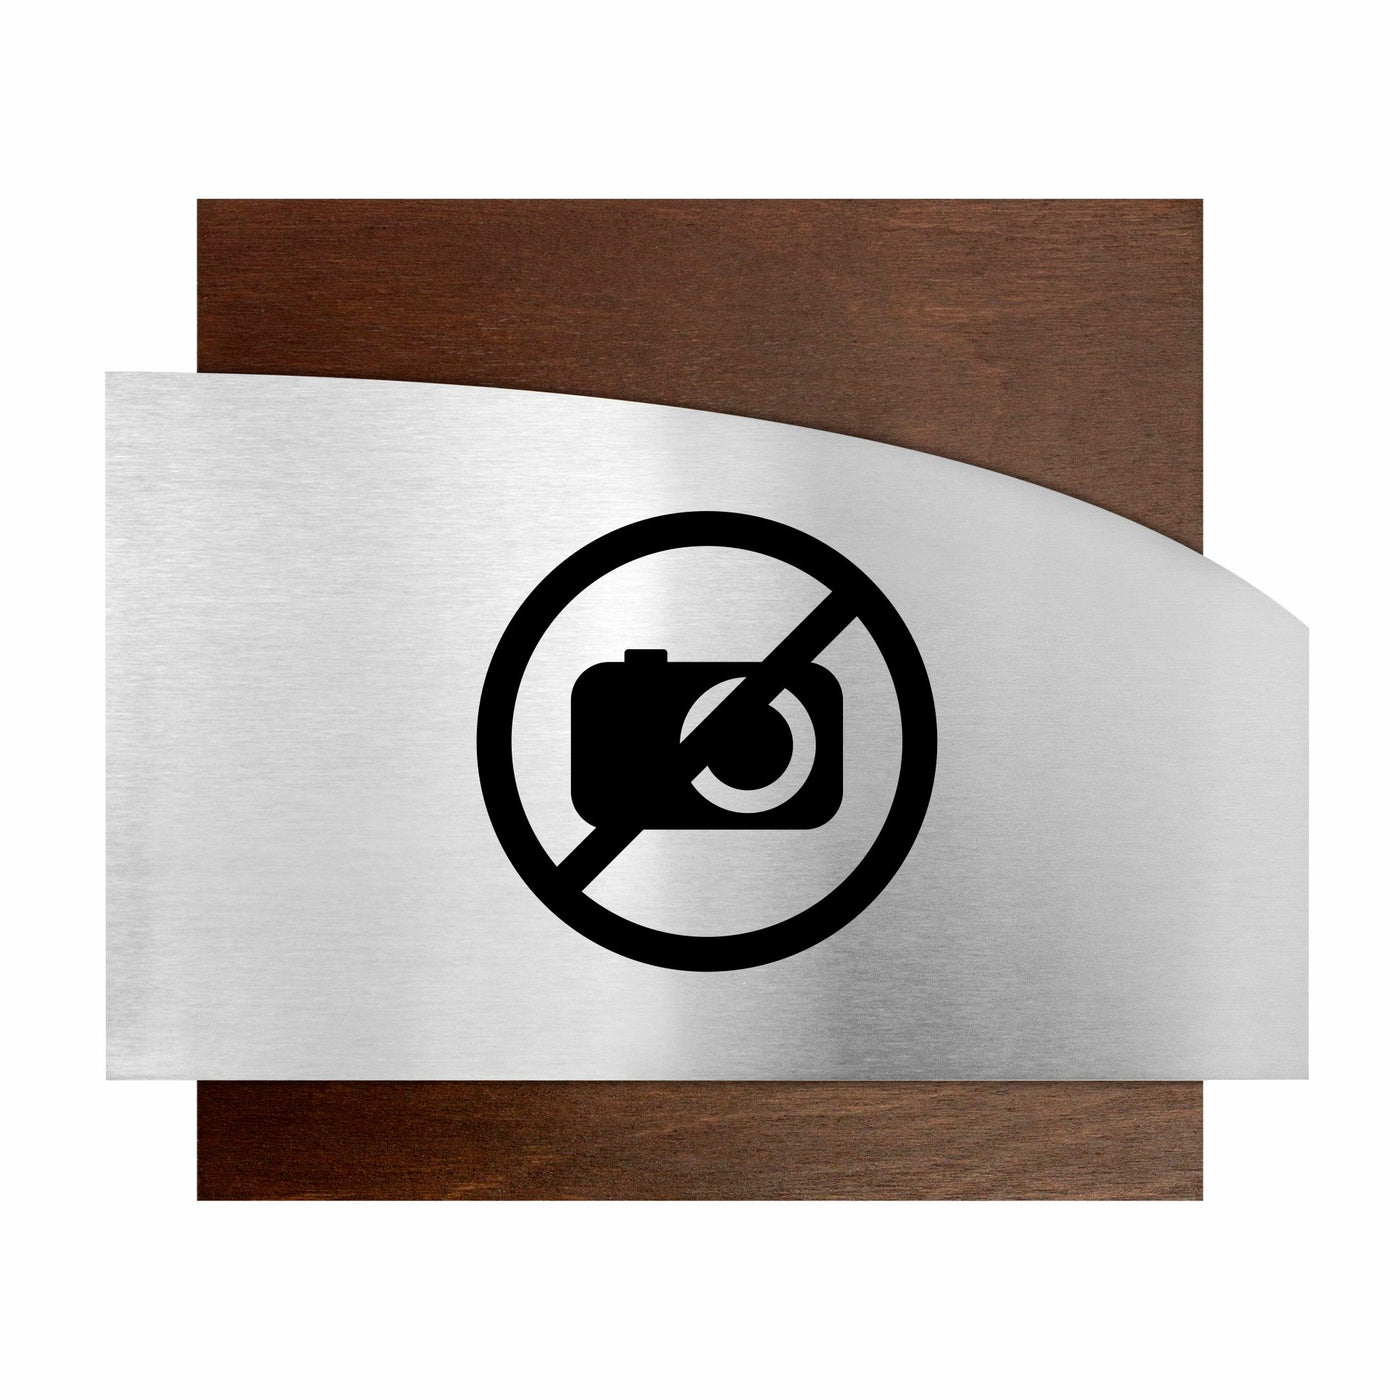 Wooden No Photography Sign - "Wave" Design